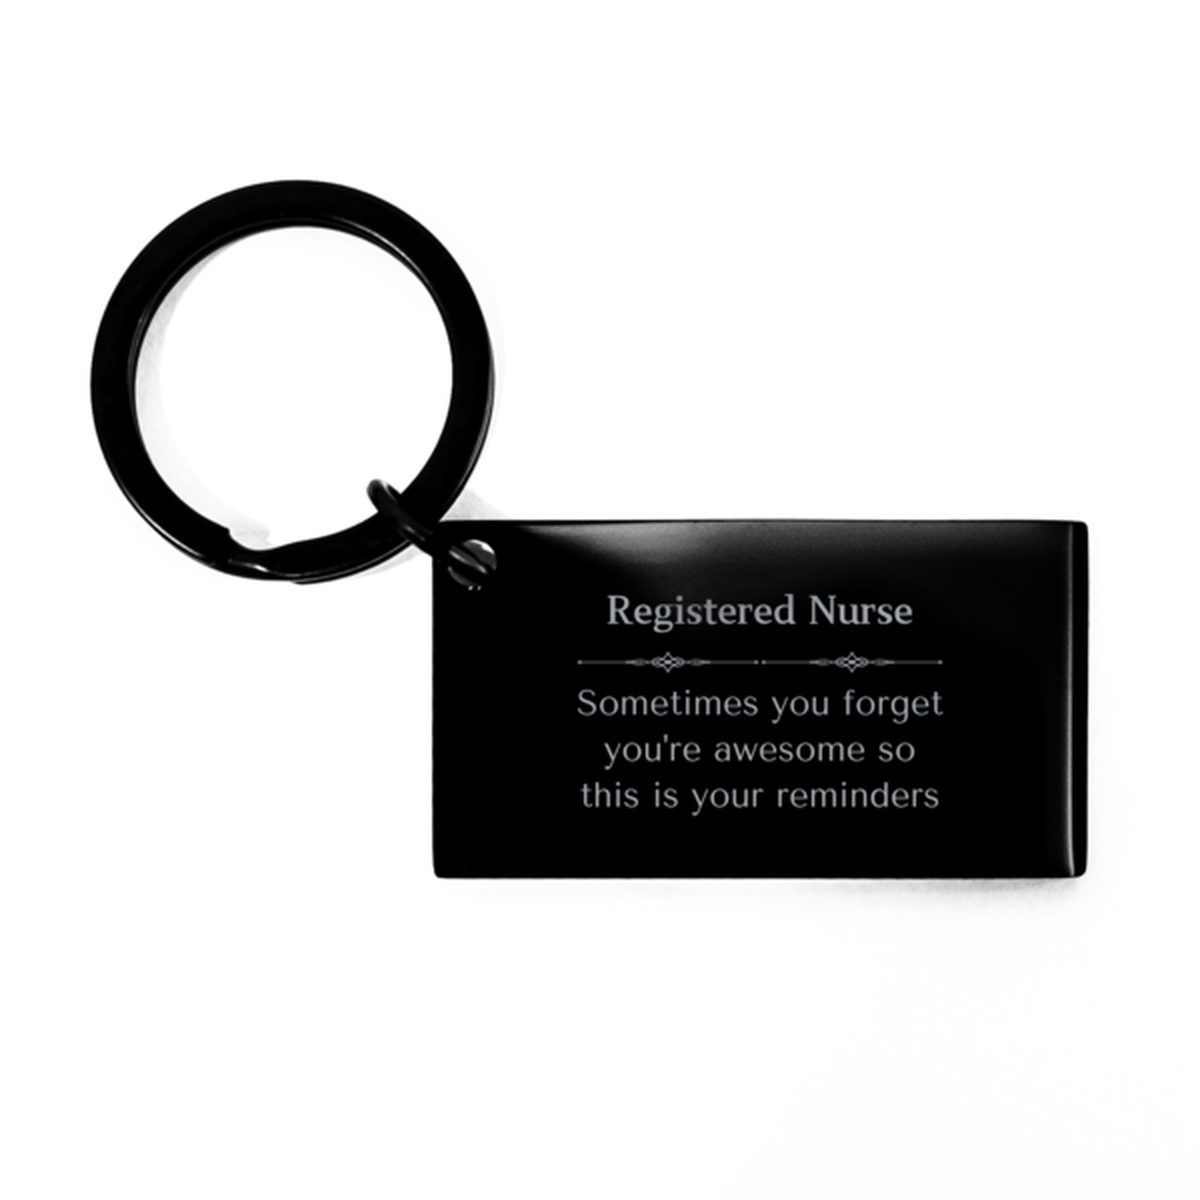 Sentimental Registered Nurse Keychain, Telemarketer Sometimes you forget you're awesome so this is your reminders, Graduation Christmas Birthday Gifts for Registered Nurse, Men, Women, Coworkers